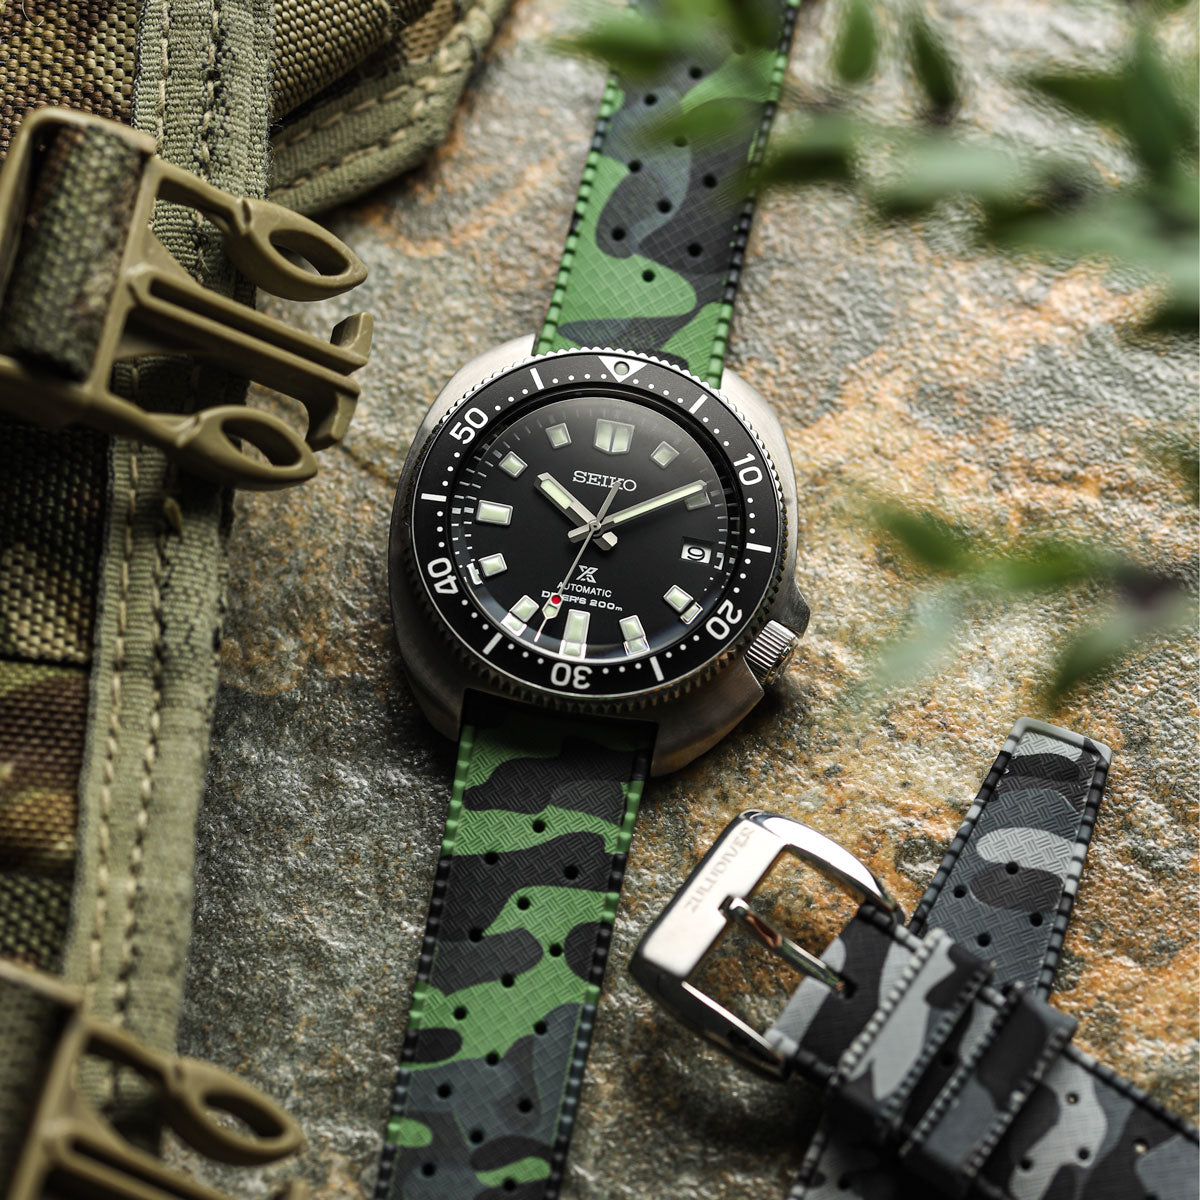 ZULUDIVER Tropical Style Camo Rubber Watch Strap - Grey - additional image 3